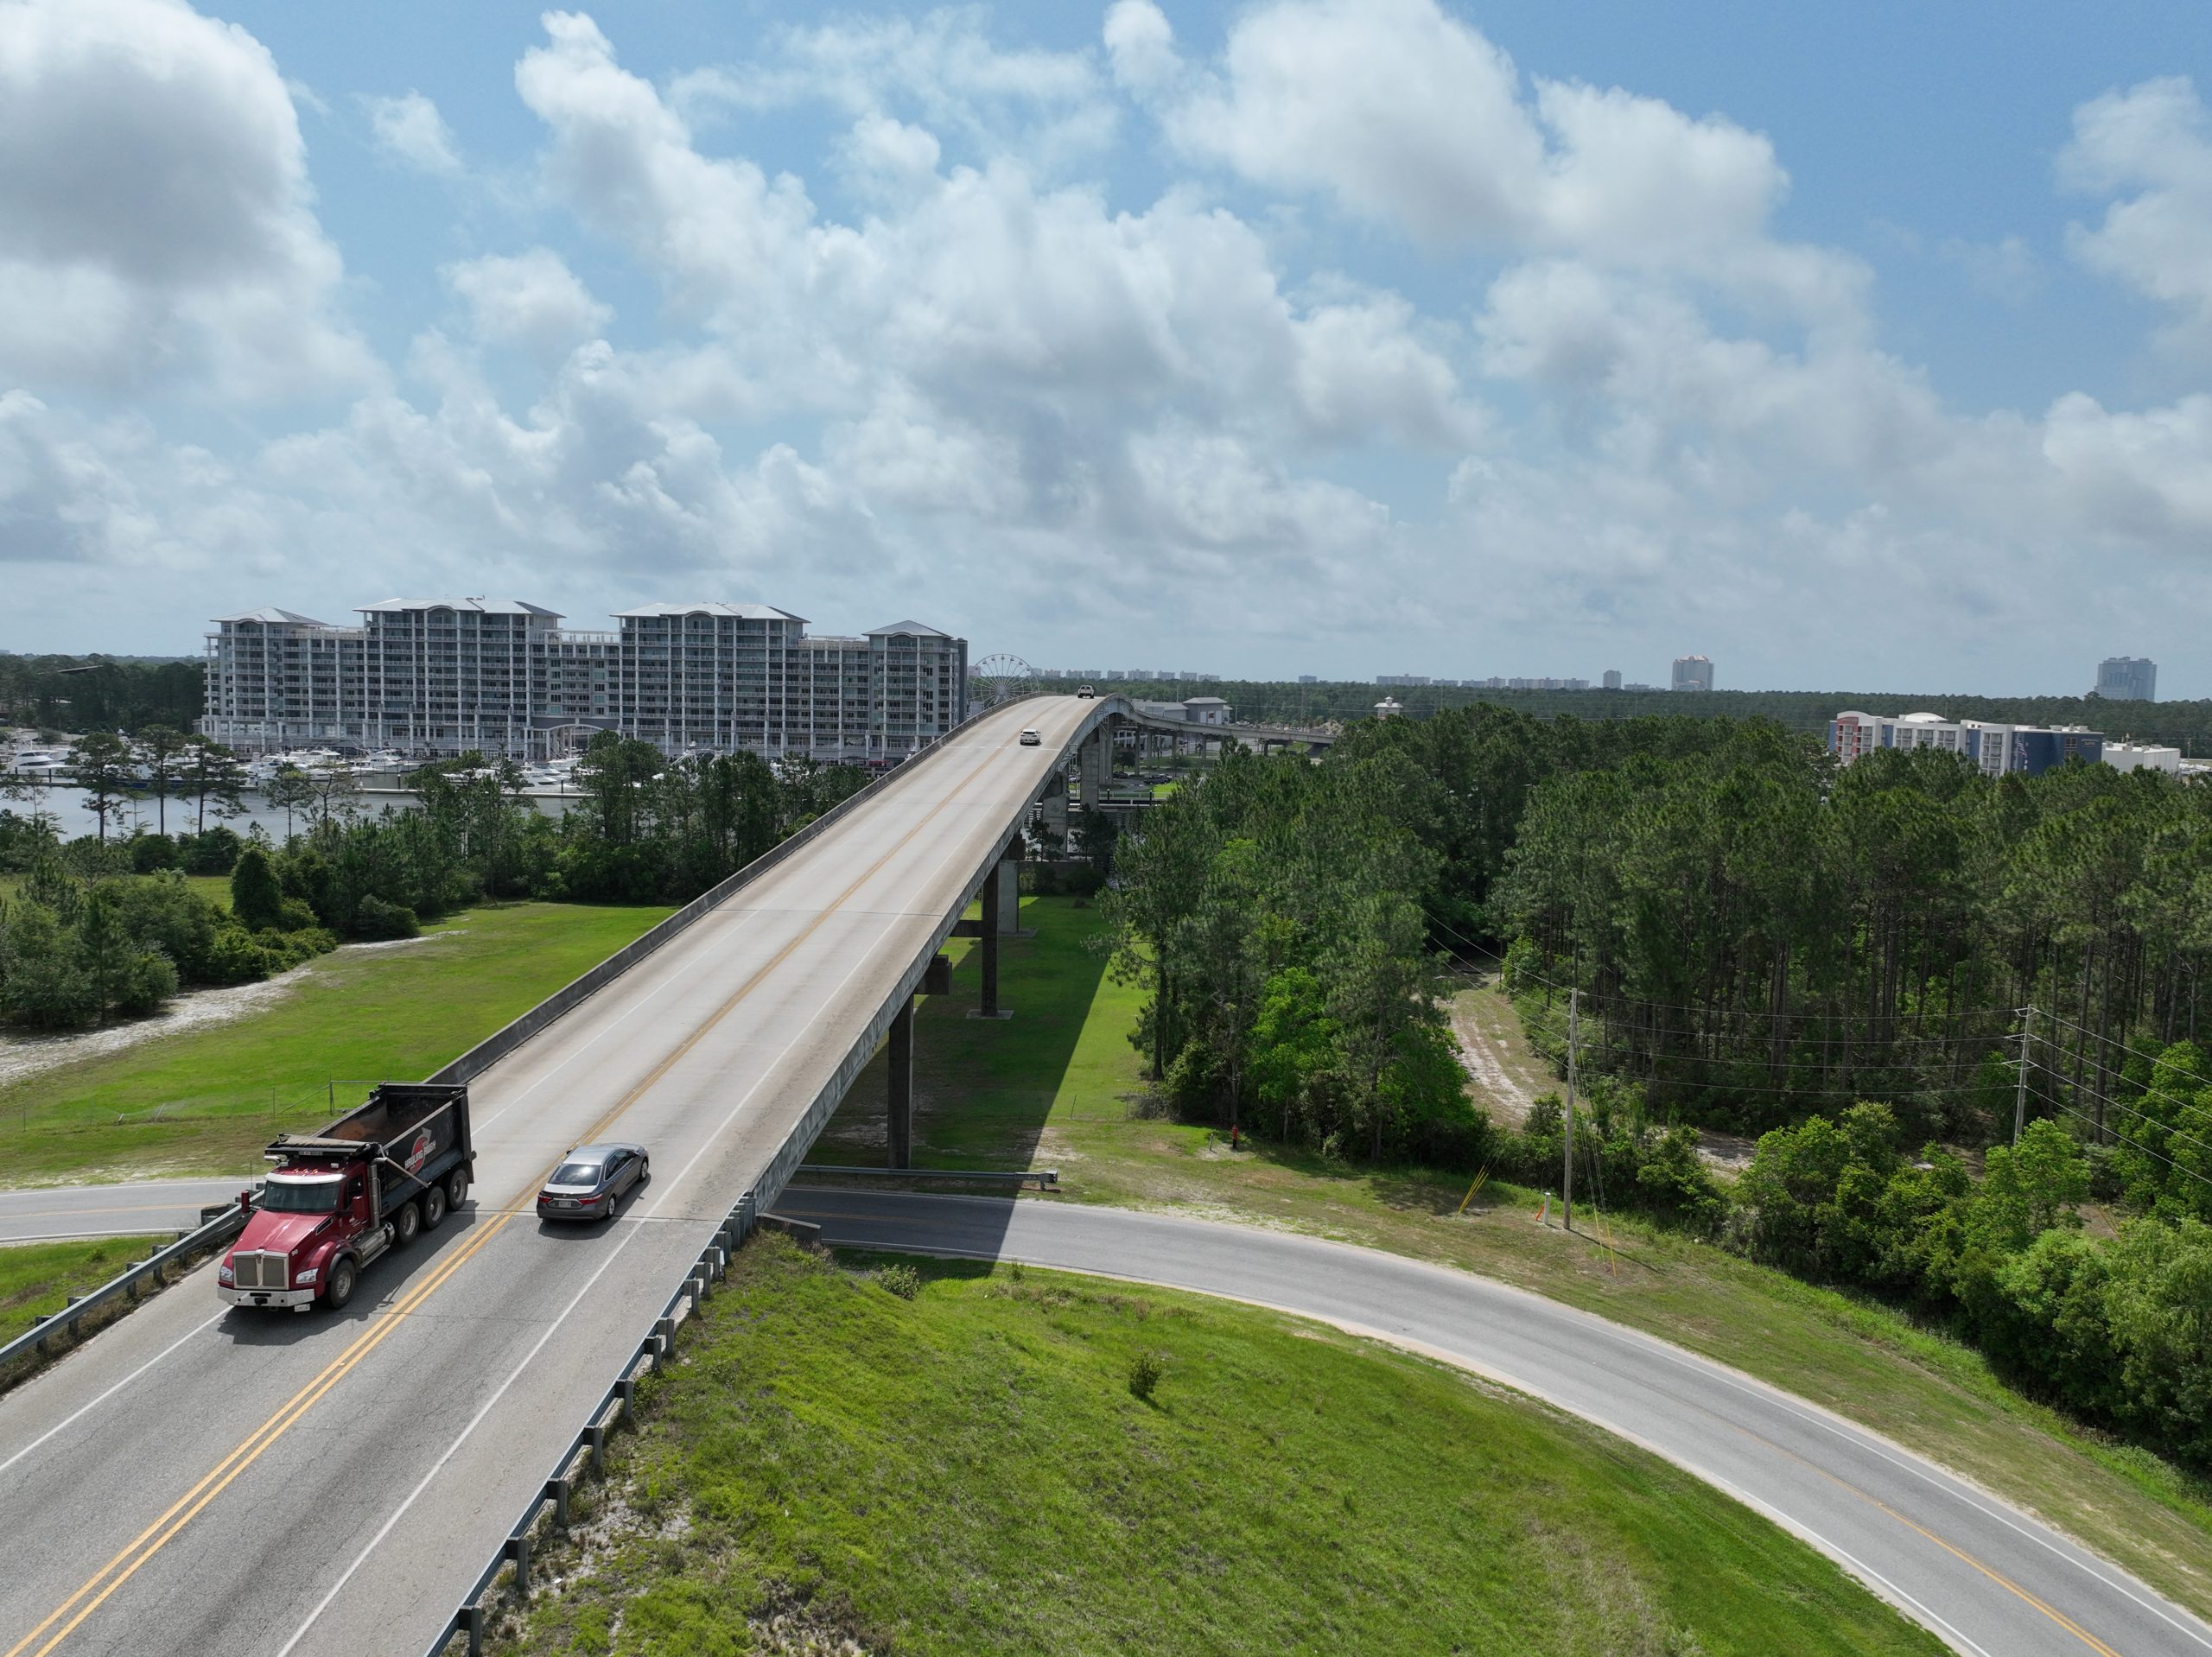 a commercial truck and passenger car cross over a bridge leading into coastal Alabama